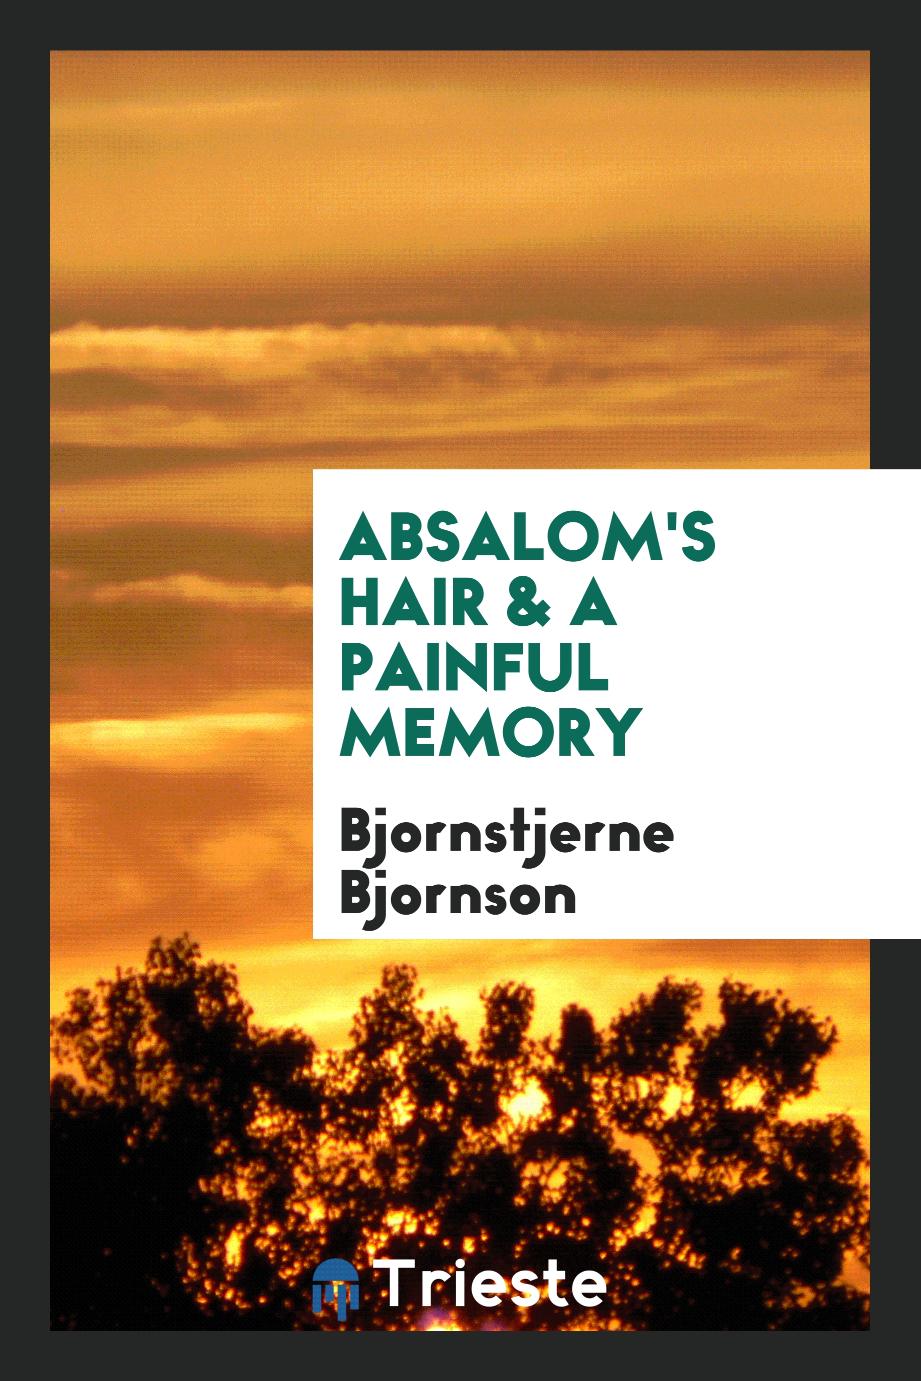 Absalom's hair & A painful memory